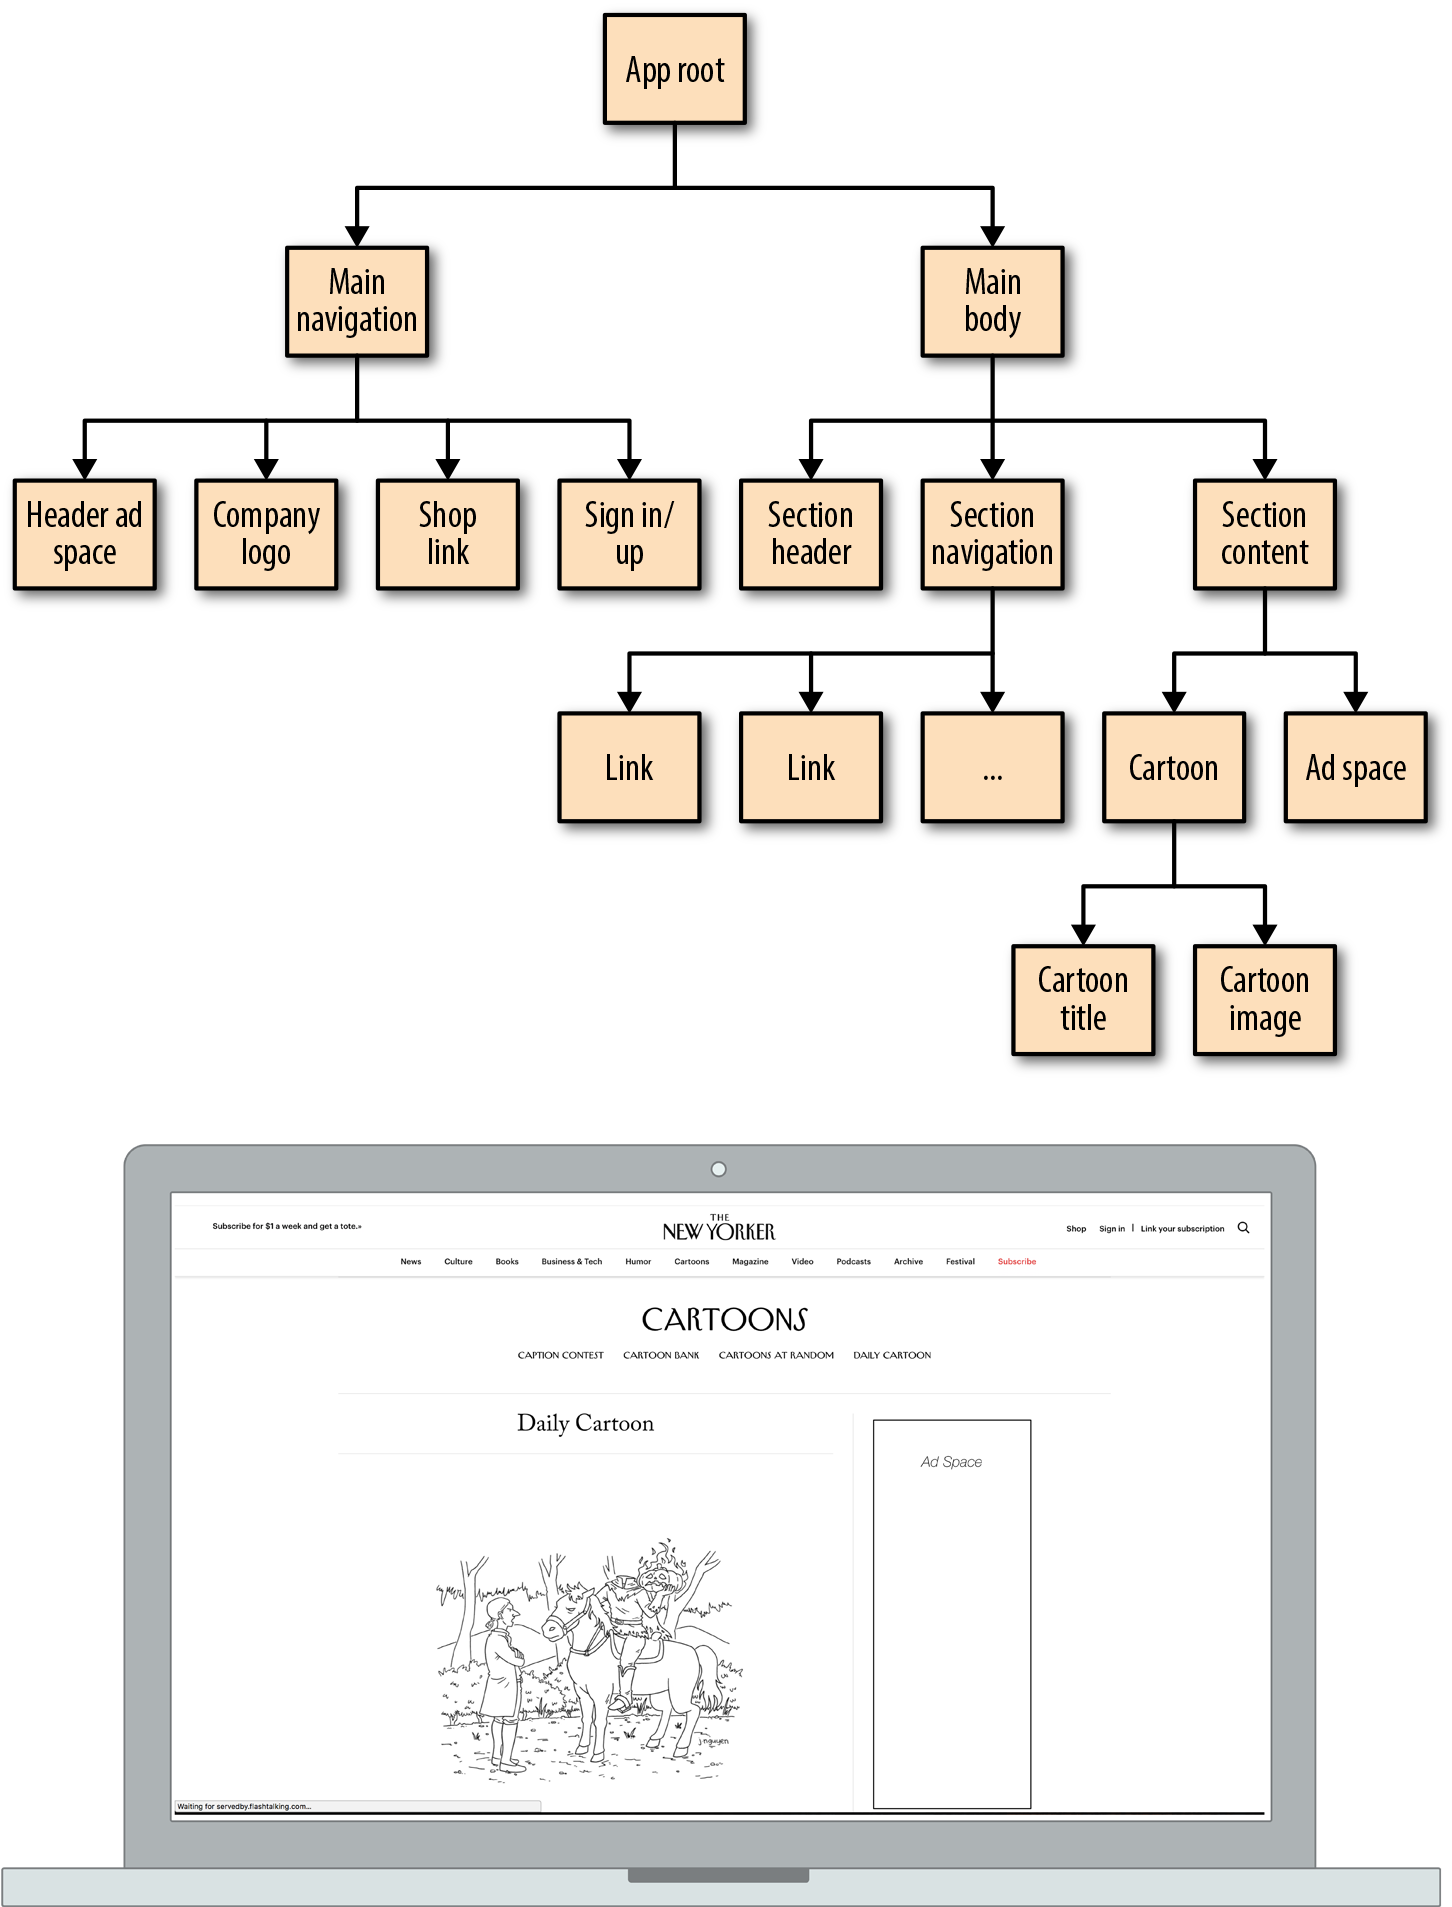 UI tree for 'the New Yorker' website